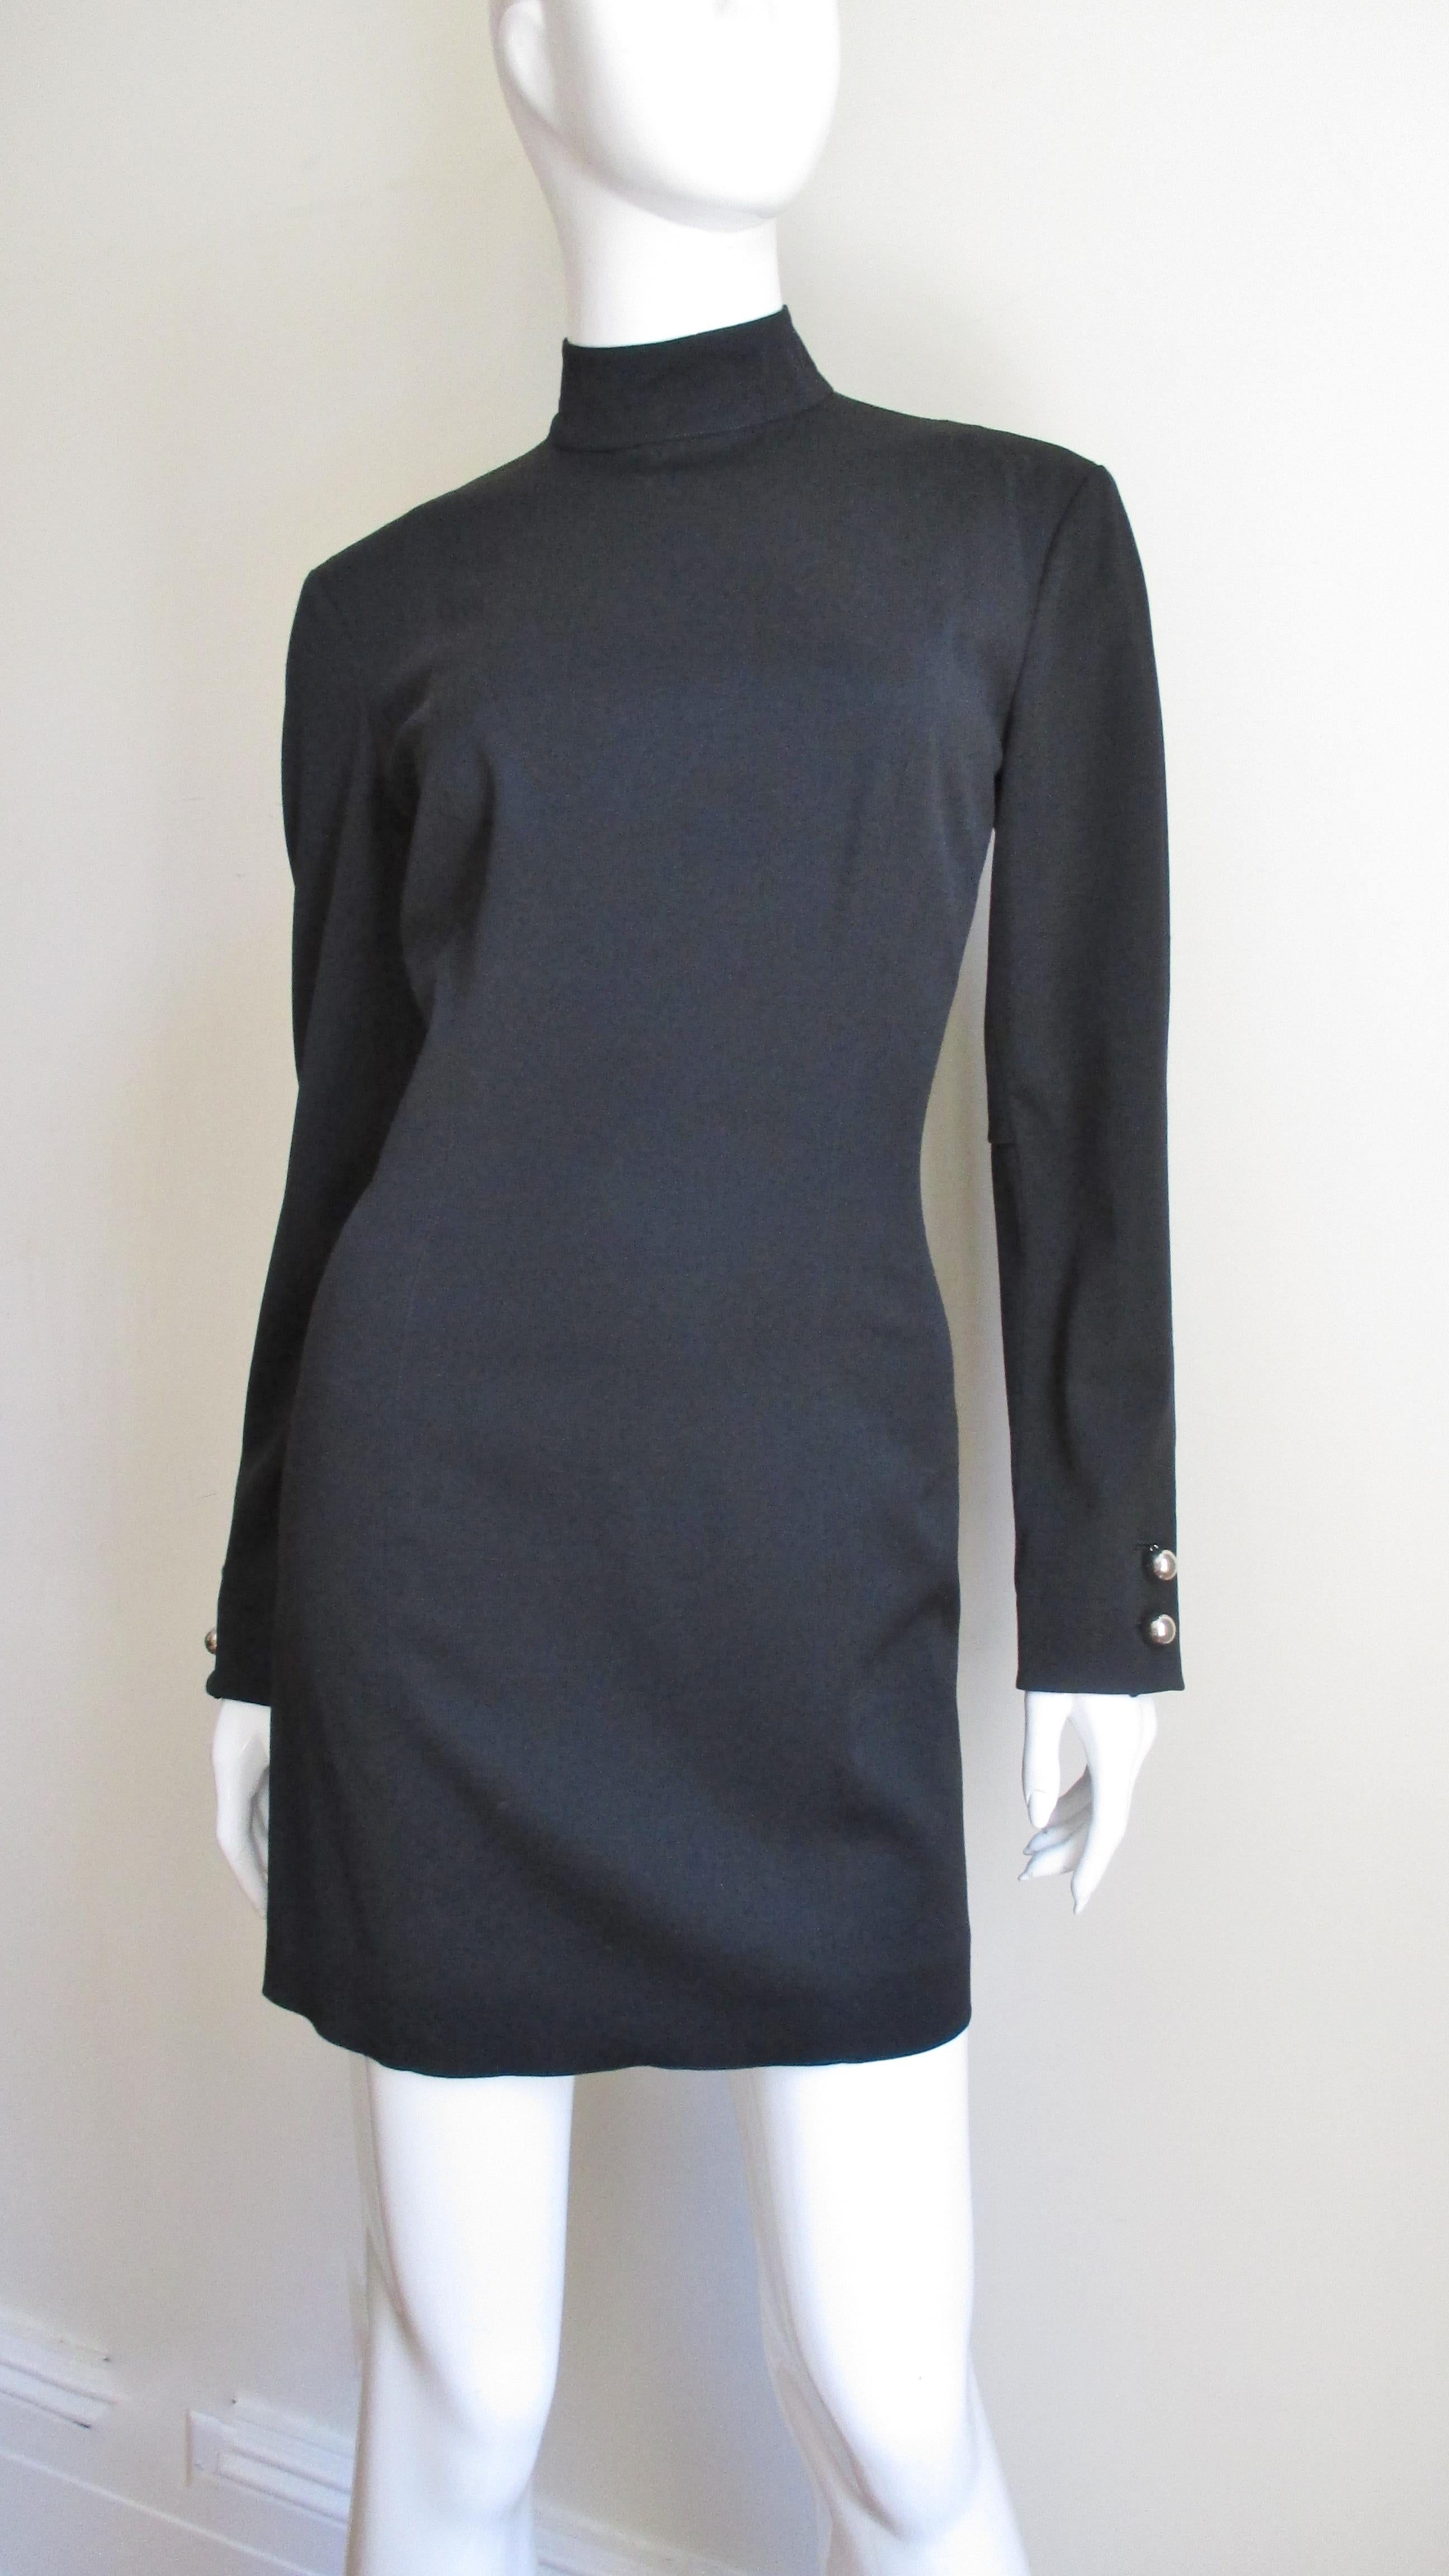 A fabulous light weight black wool (with some stretch) dress from Claude Montana.  It has princess seaming for a great fit, a stand up collar and silver metal ball button cuffs.  It is unlined with finished seams and a back zipper with a silver